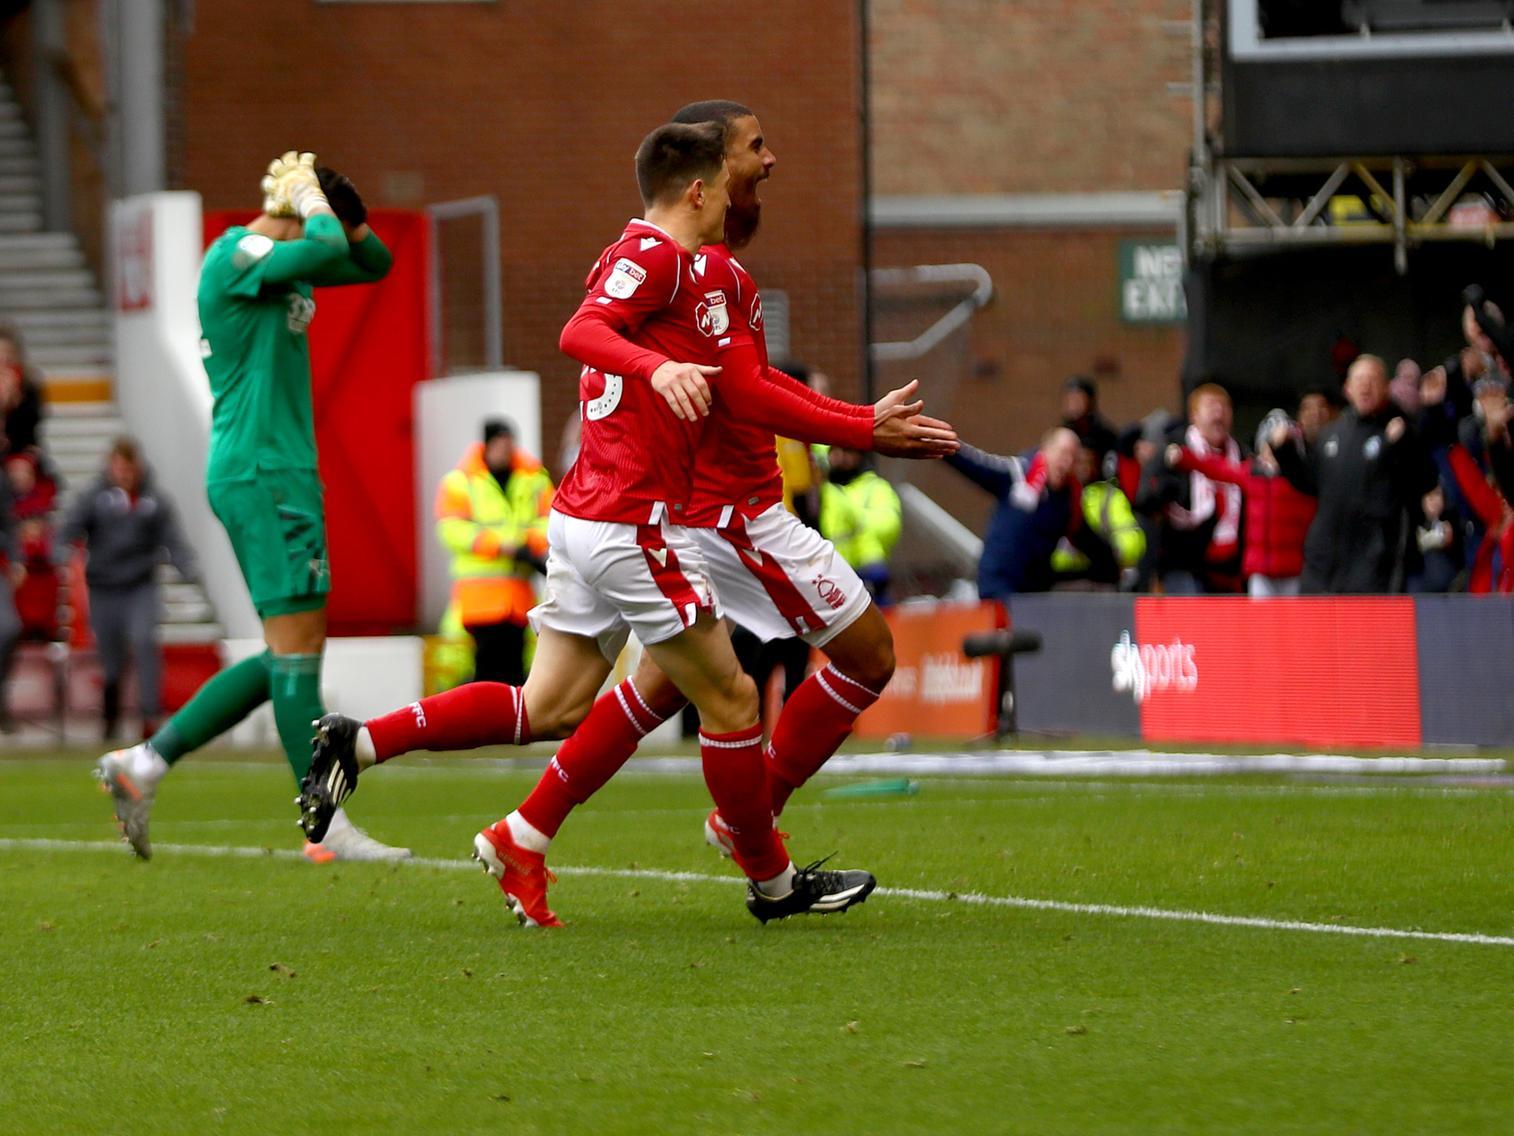 Nottingham Forest striker Lewis Grabban has revealed that he was gifted his goal in the 1-0 win over Derby County, after their goalkeeper Kelle Roos failed to cover his near post. (Nottingham Post)